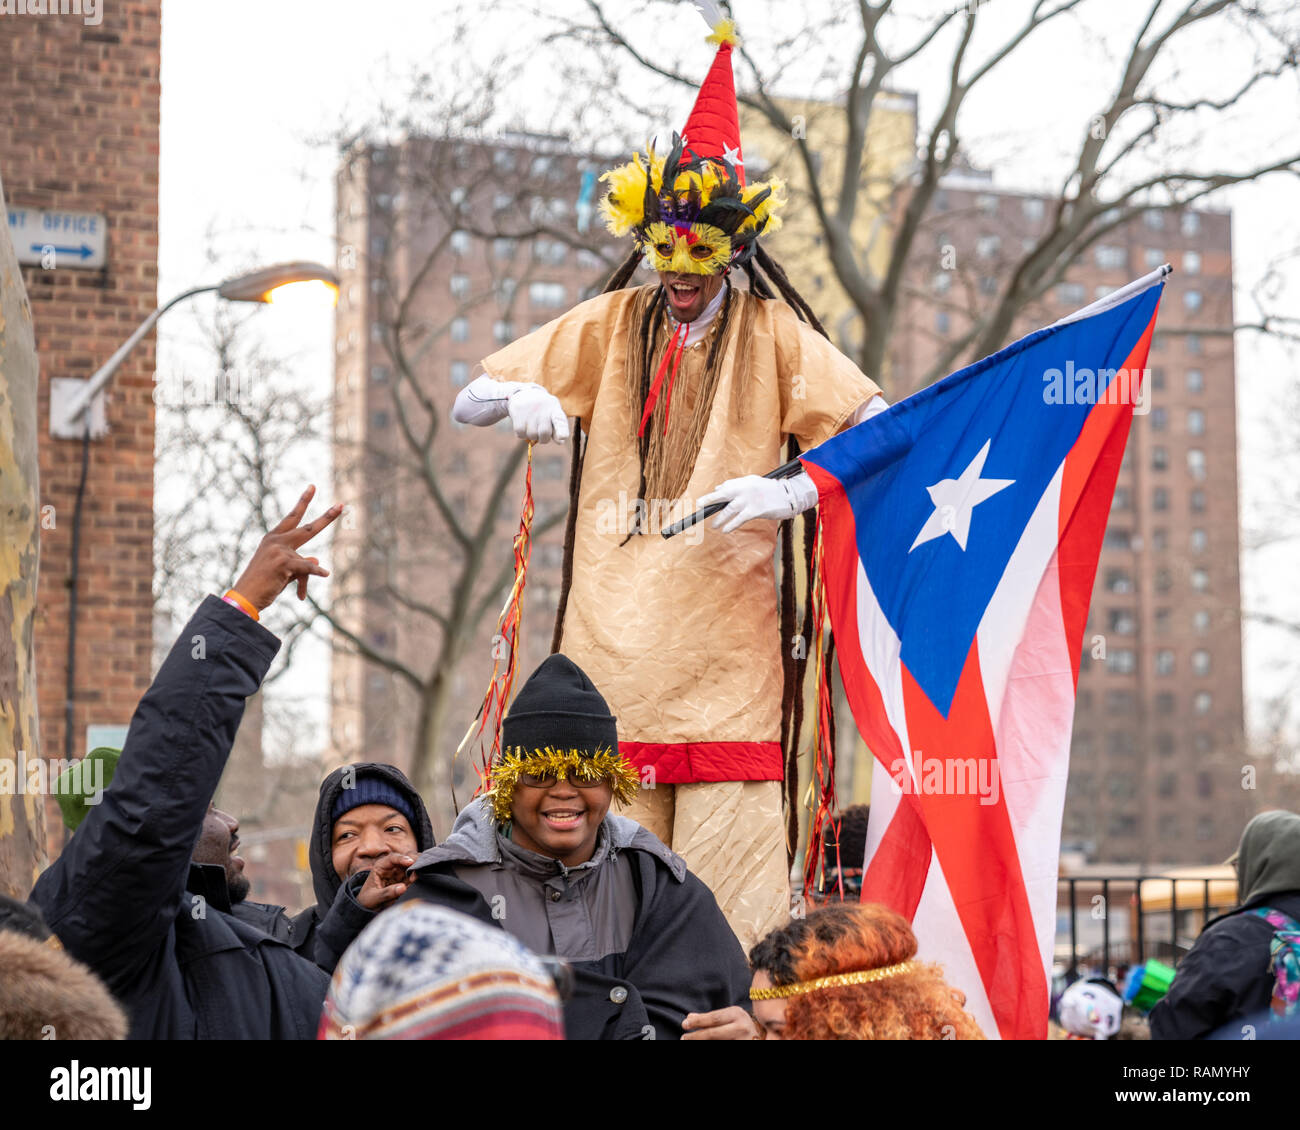 New York, USA. 4th Jan 2019. A performer on stilts holds a flag of Puerto Rico as he interacts with the public attending the 42nd Annual Three Kings Day Parade El Barrio (East Harlem, New York city), Organized by El Museo del Barrio, the event celebrates the popular belief that three wise men visited Jesus. Credit: Enrique Shore/Alamy Live News Stock Photo